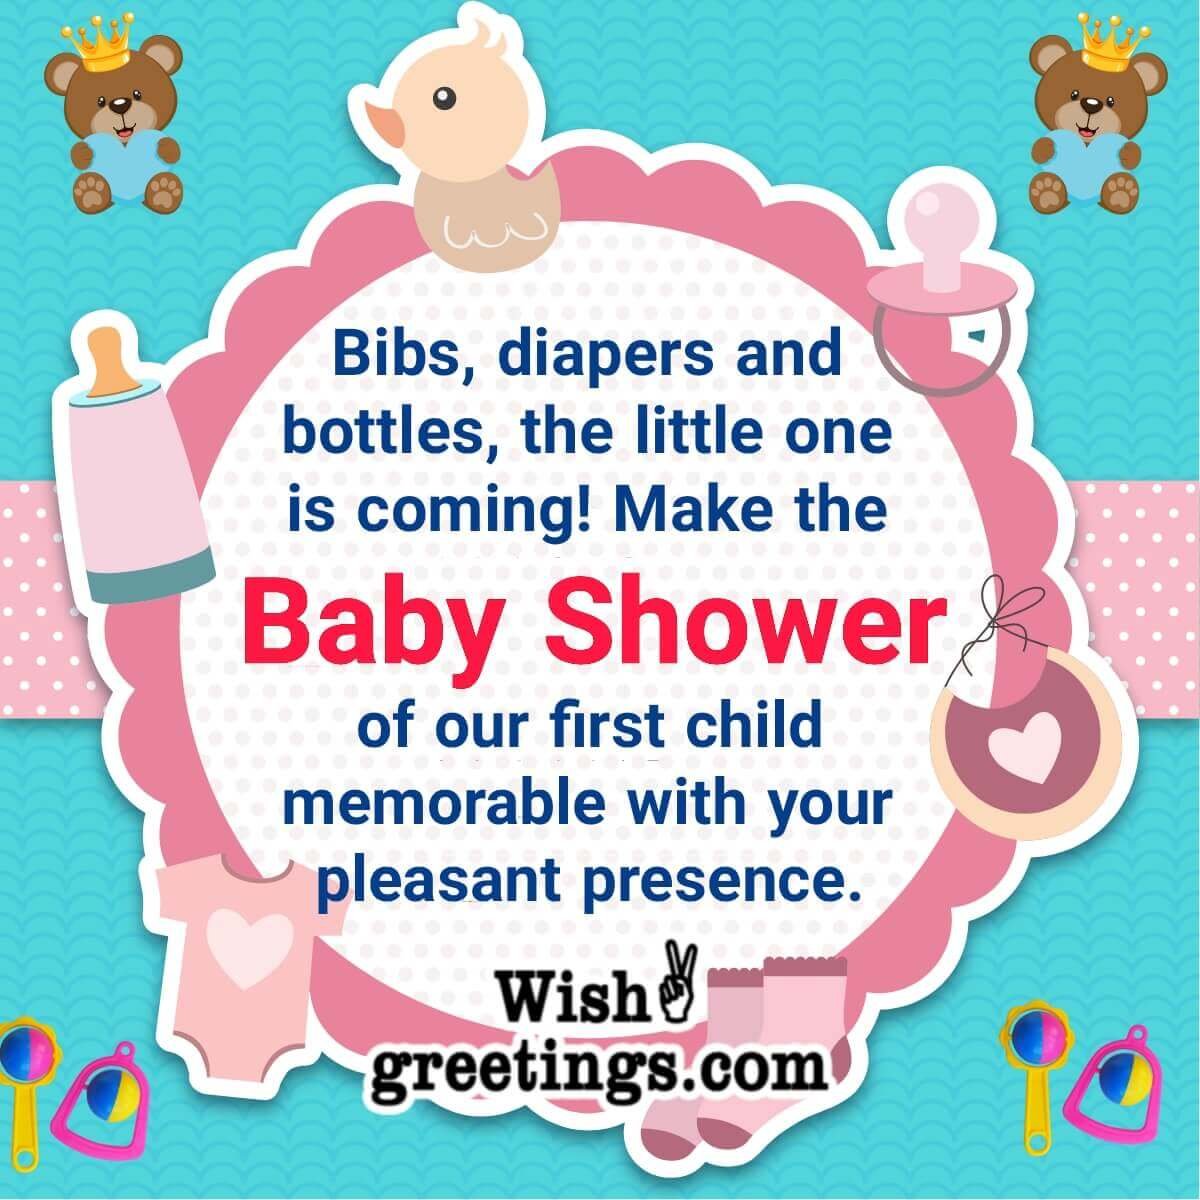 Baby Shower Invitation For Friends